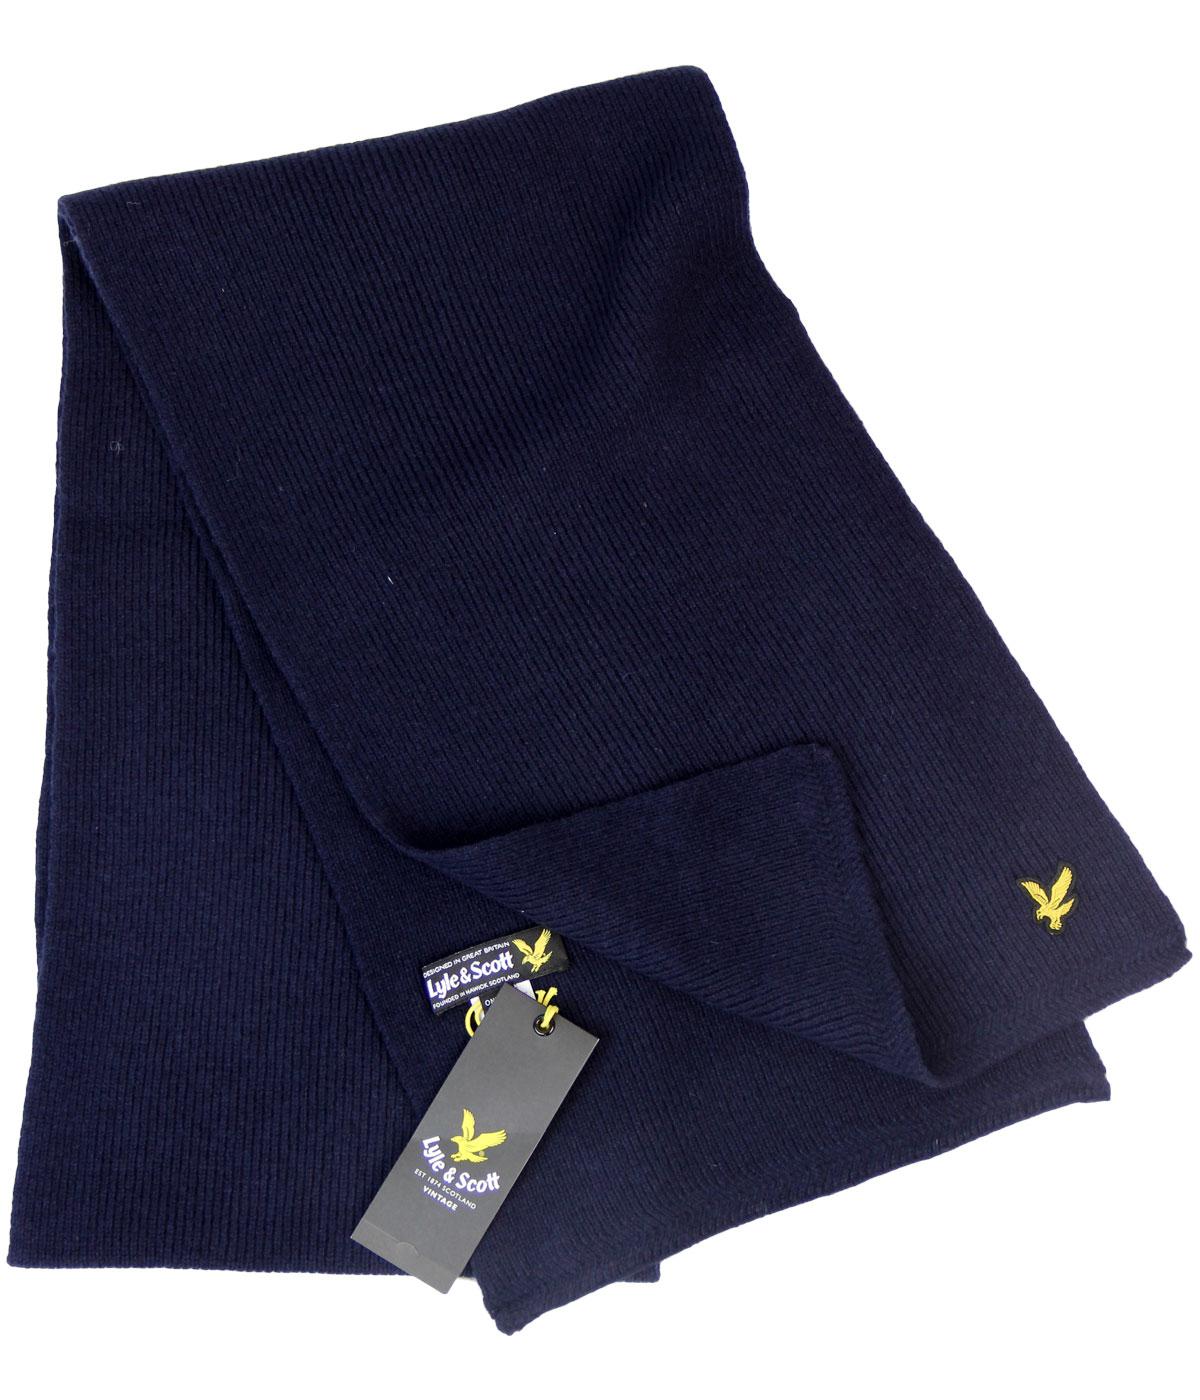 Racked Rib LYLE AND SCOTT Retro Indie Knit Scarf 